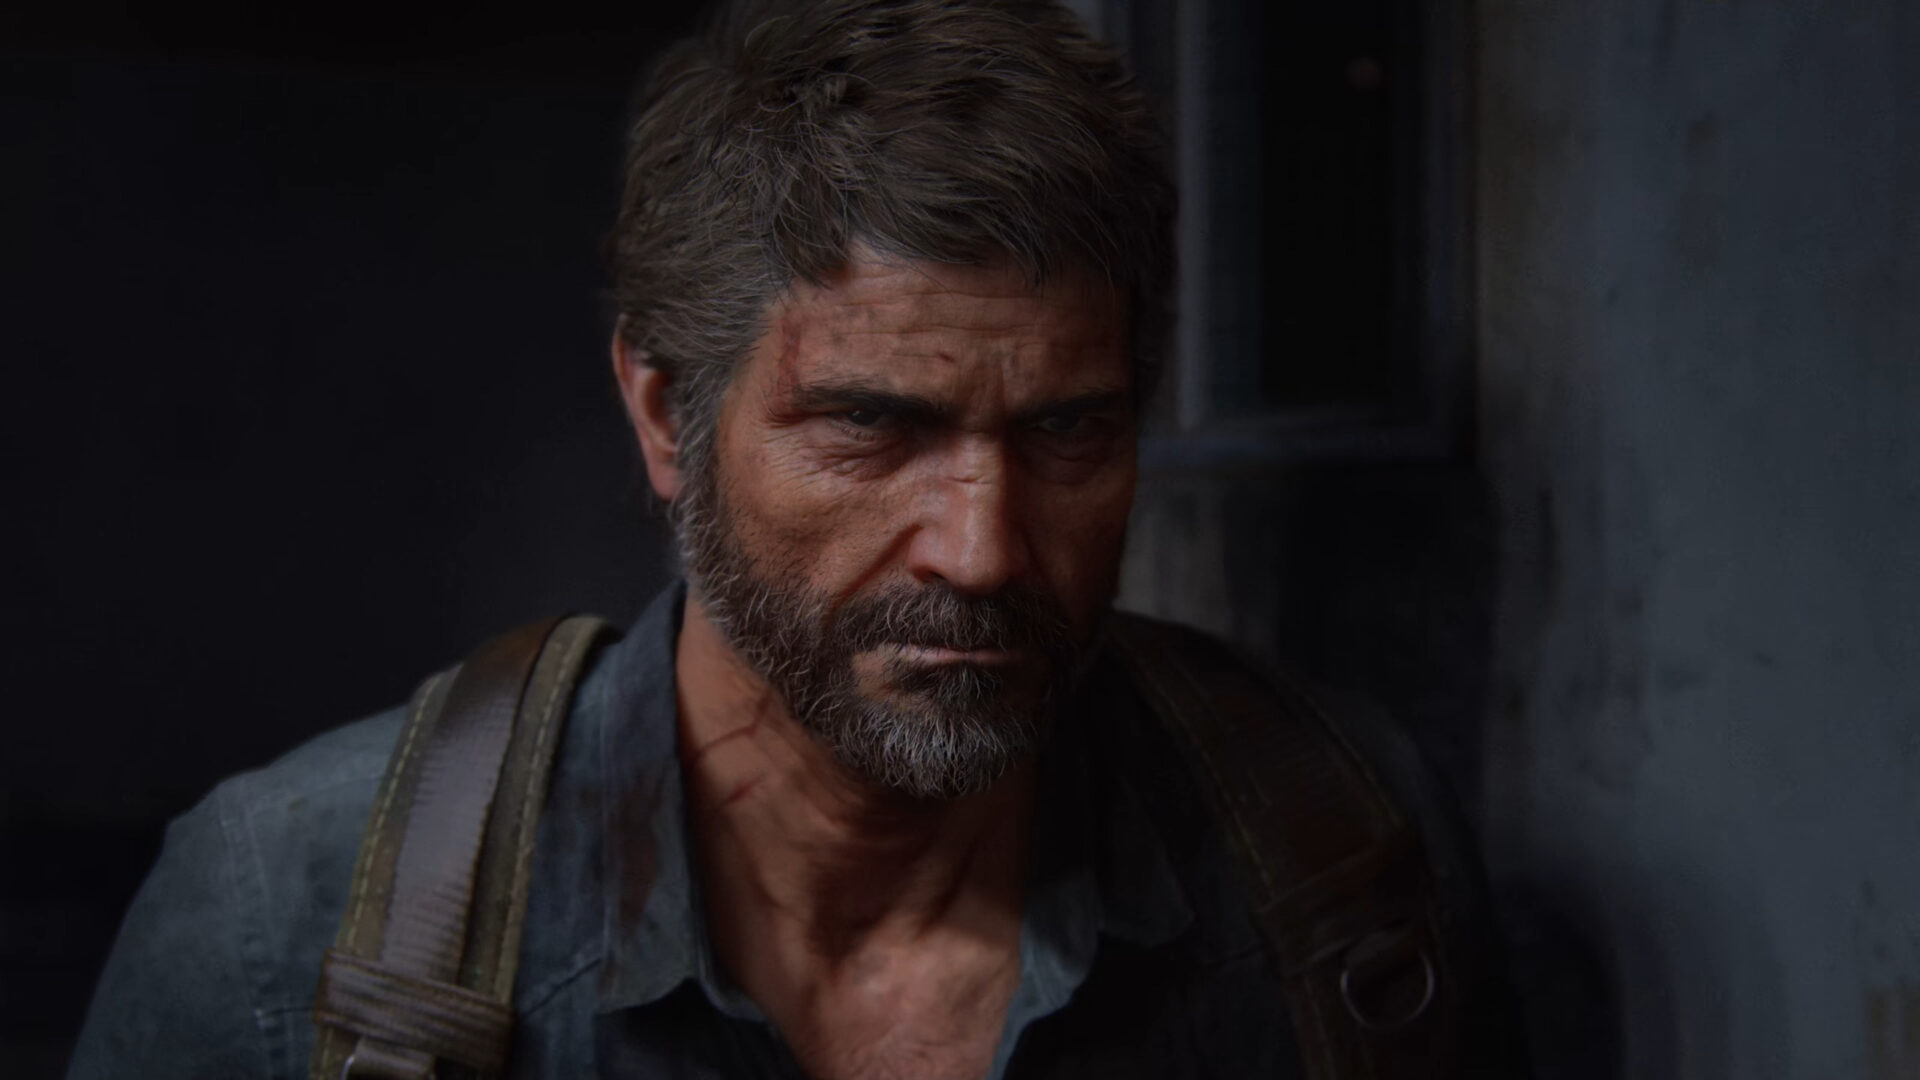 The Last Of Us Star Pedro Pascal Says He “Wanted To Create A Healthy  Distance” Between Live-Action Series And Original Game - Bounding Into  Comics